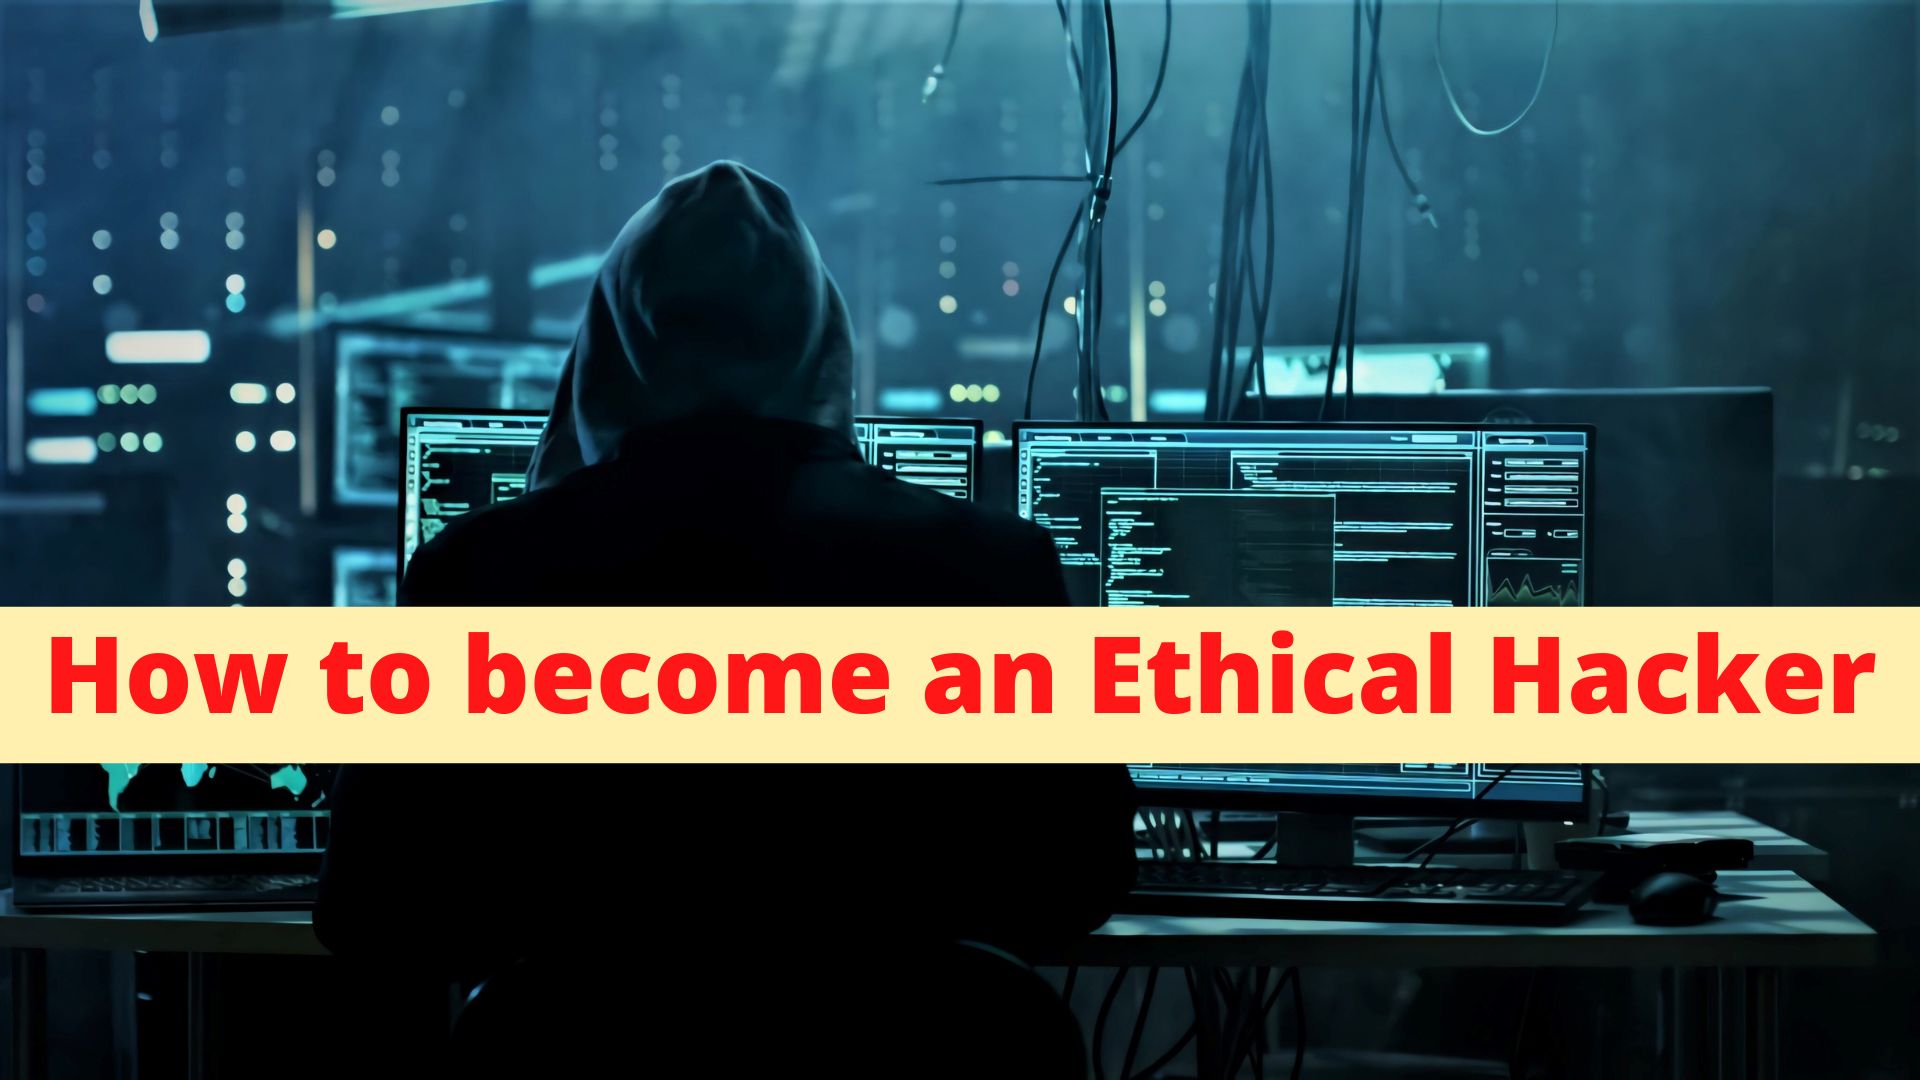 How to become an ethical hacker